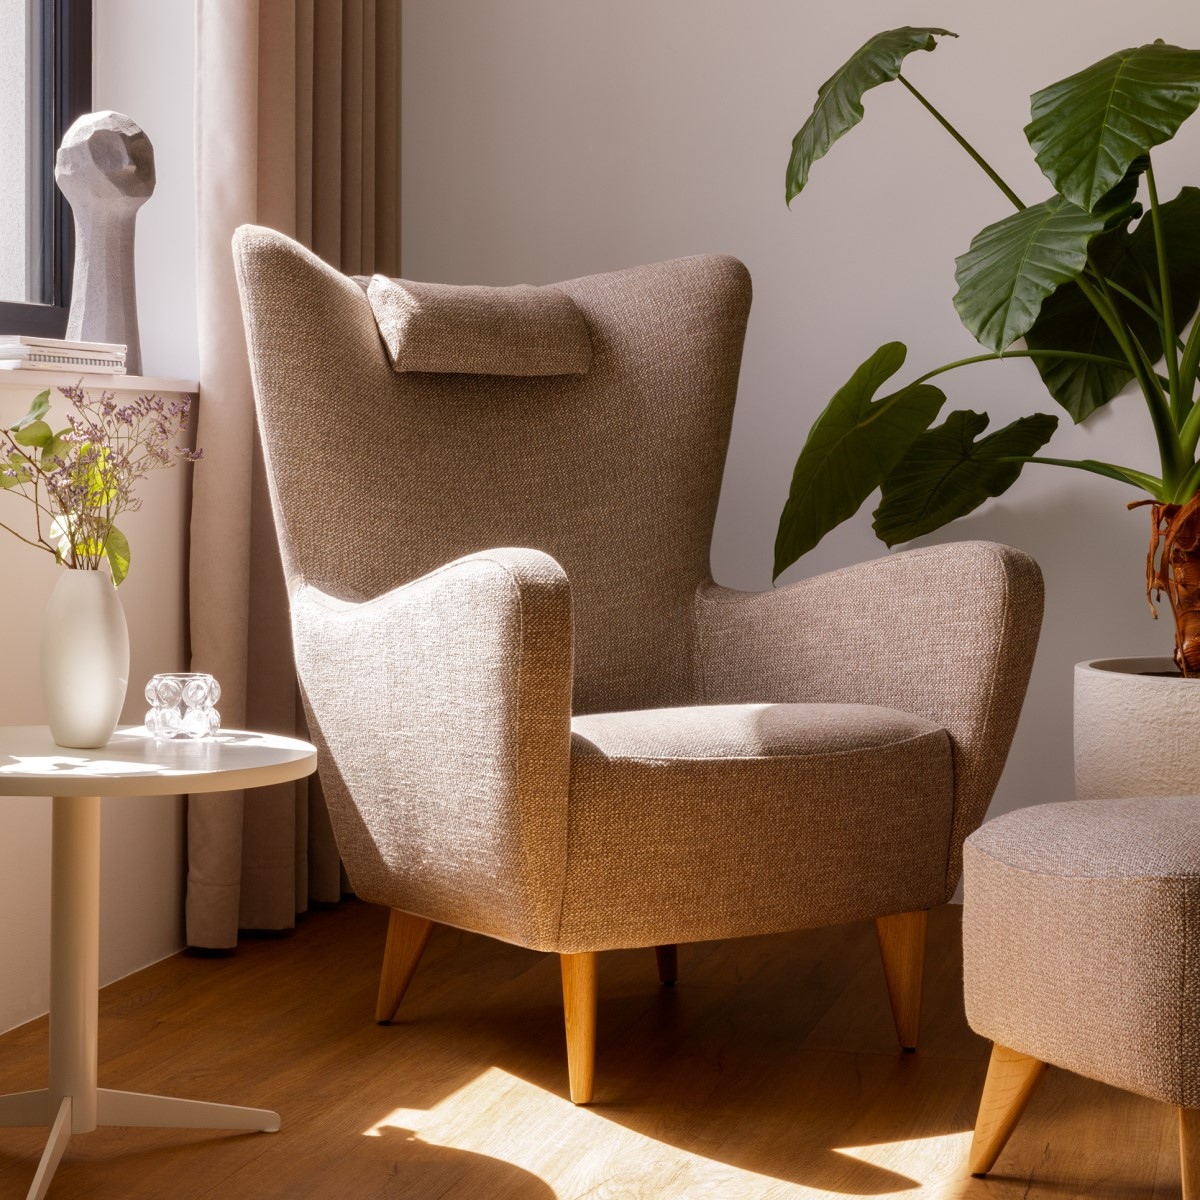 Soft curves, shaped armrests and perfect proportions.

Enjoy 20% OFF sofas and chairs, plus FREE delivery until 31st August!

#CromeInteriors #SITS #Scandi #HomeInteriors #HomeDecor #Comfort #InteriorGoals #ModernHome #NeutralInteriors #LivingRoom #MiltonKeynesFurniture